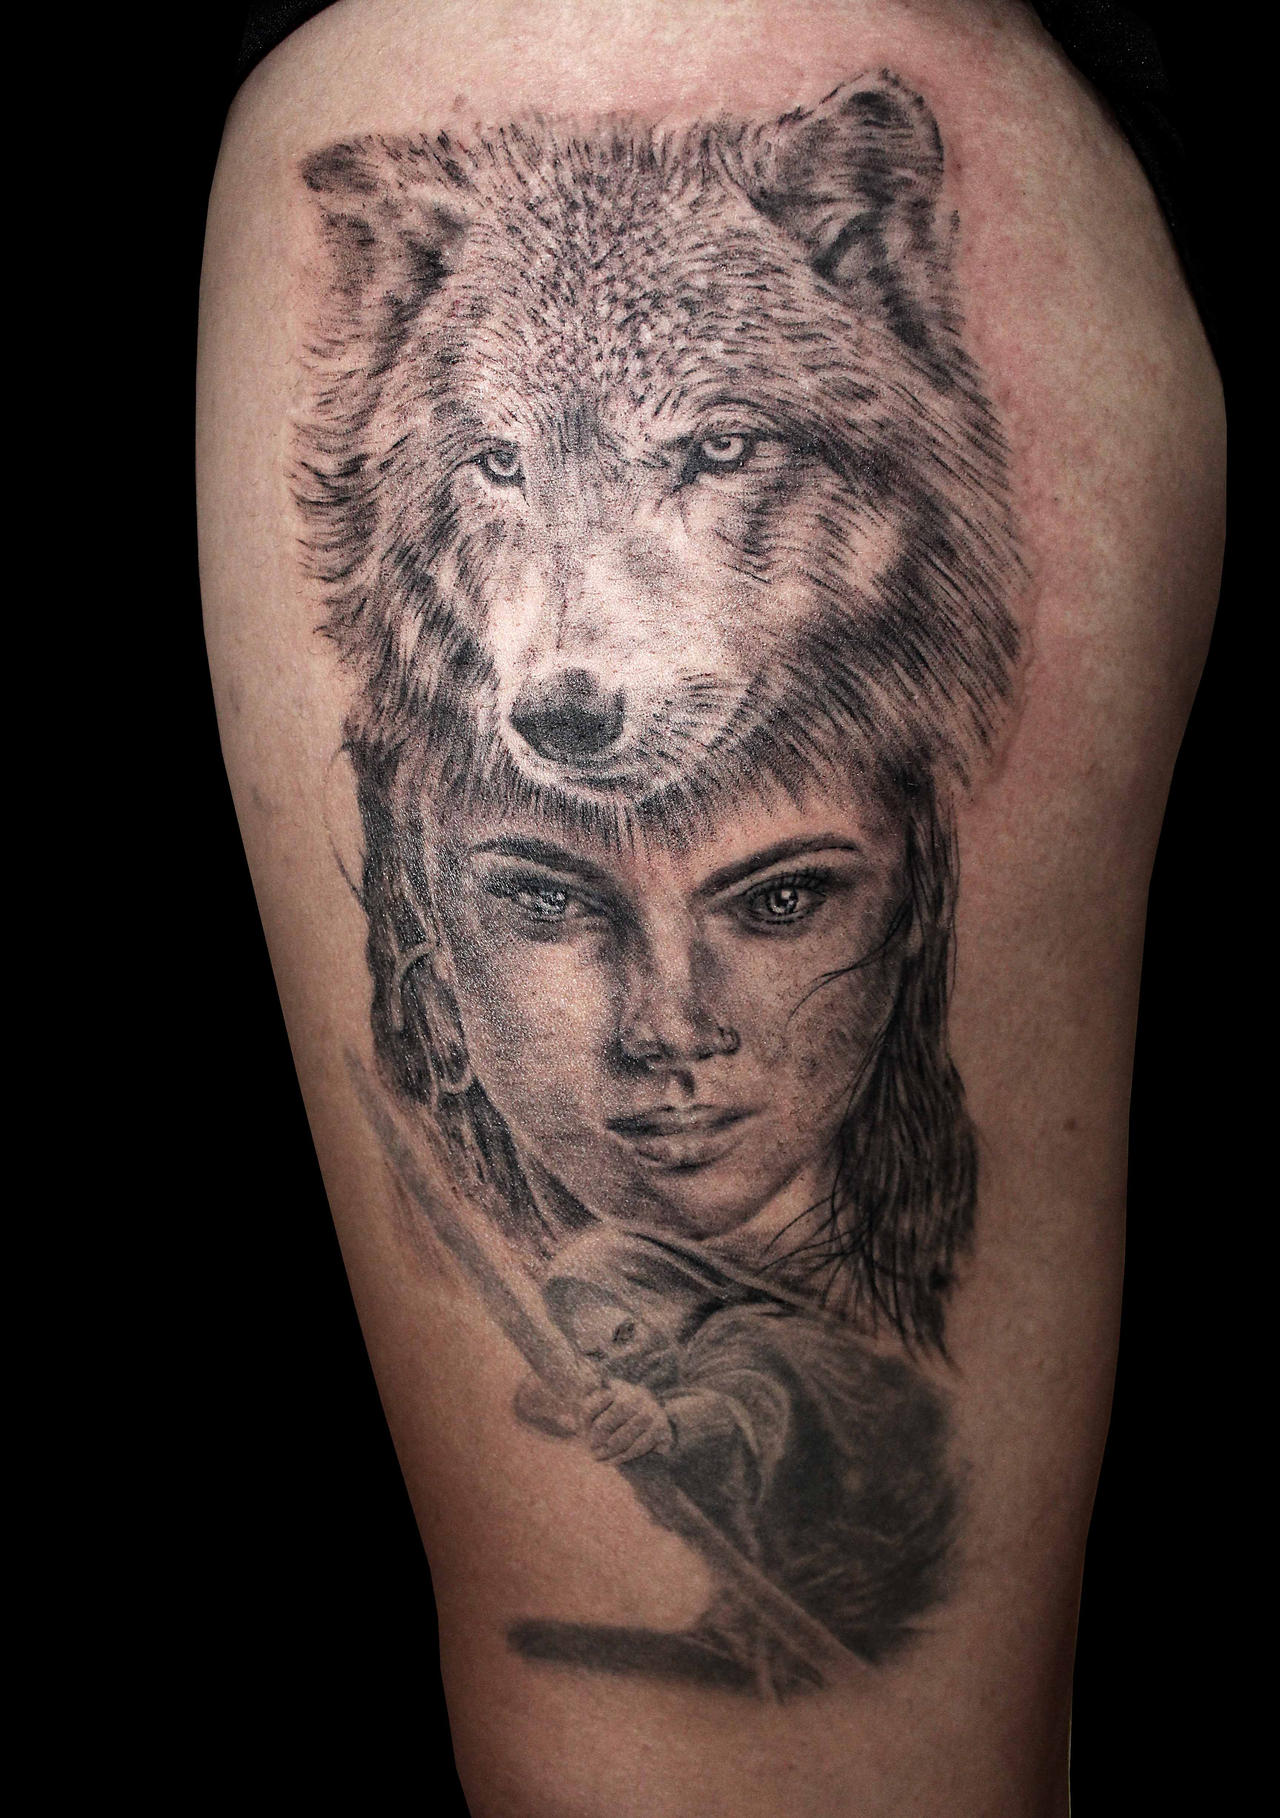 Girl and wolf portrait tattoo by Facundo-Pereyra on DeviantArt